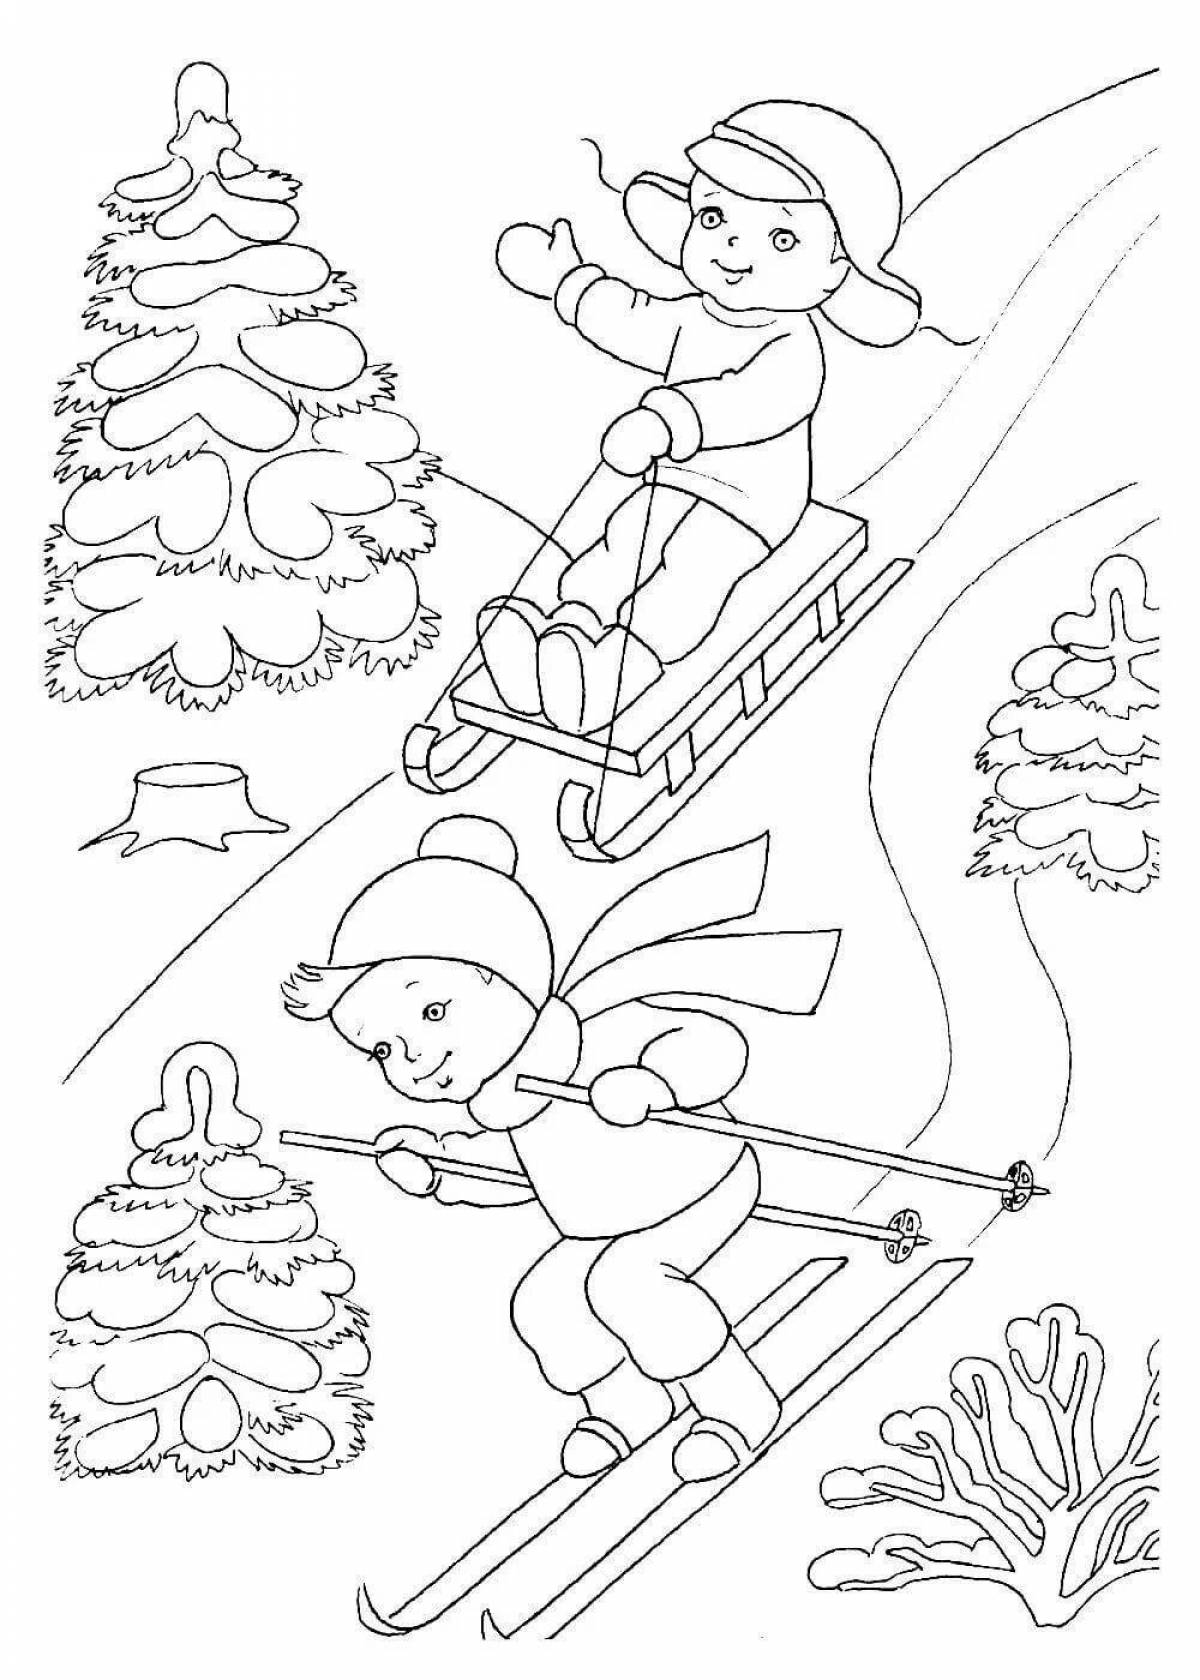 Playful winter slide coloring page